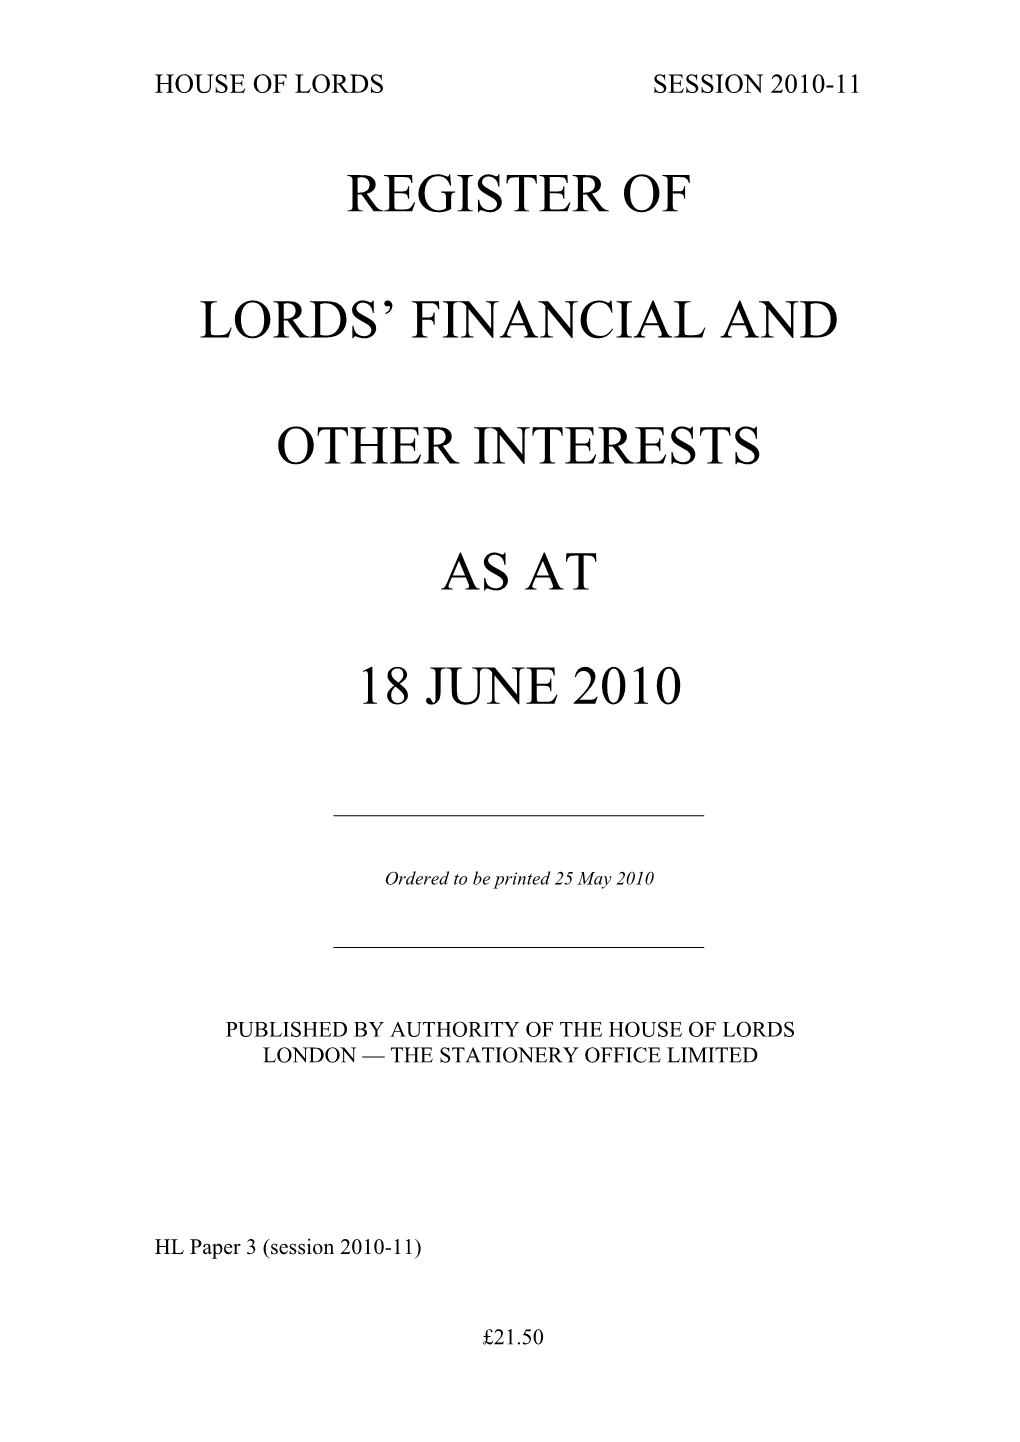 Register of Lords' Interests Session 2010-12